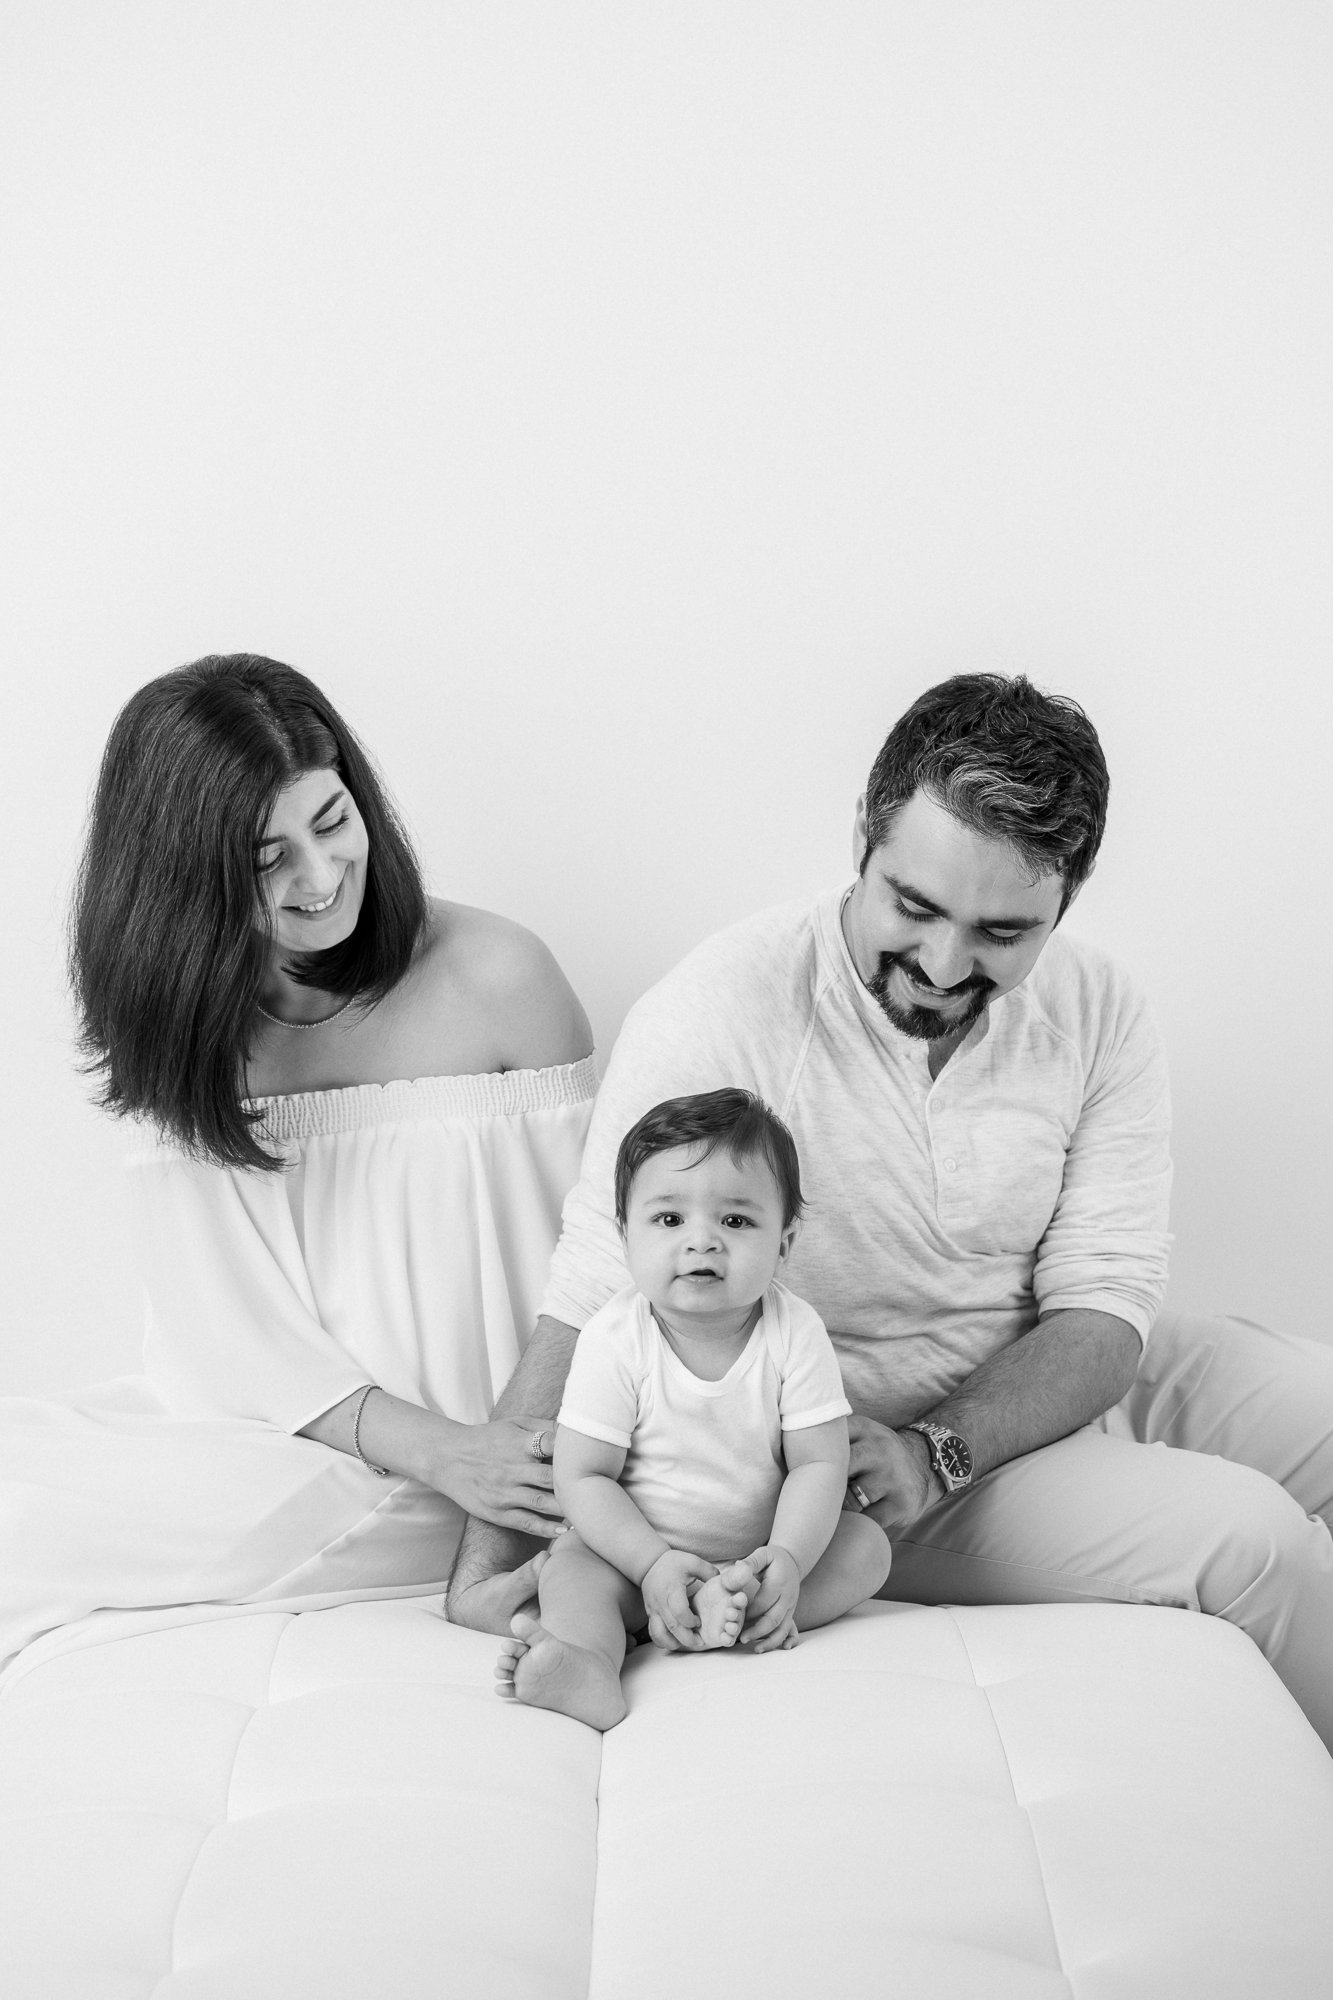   Family portrait of mom and dad posing with baby, taken by family photographer Nicole Hawkins. Family photoshoot with infant pose ideas #UnionCountyFamilyPhotographer #BergenCountyFamilyPhotographer #NorthernNewJerseyFamilyPhotographer #NorthernNewJ